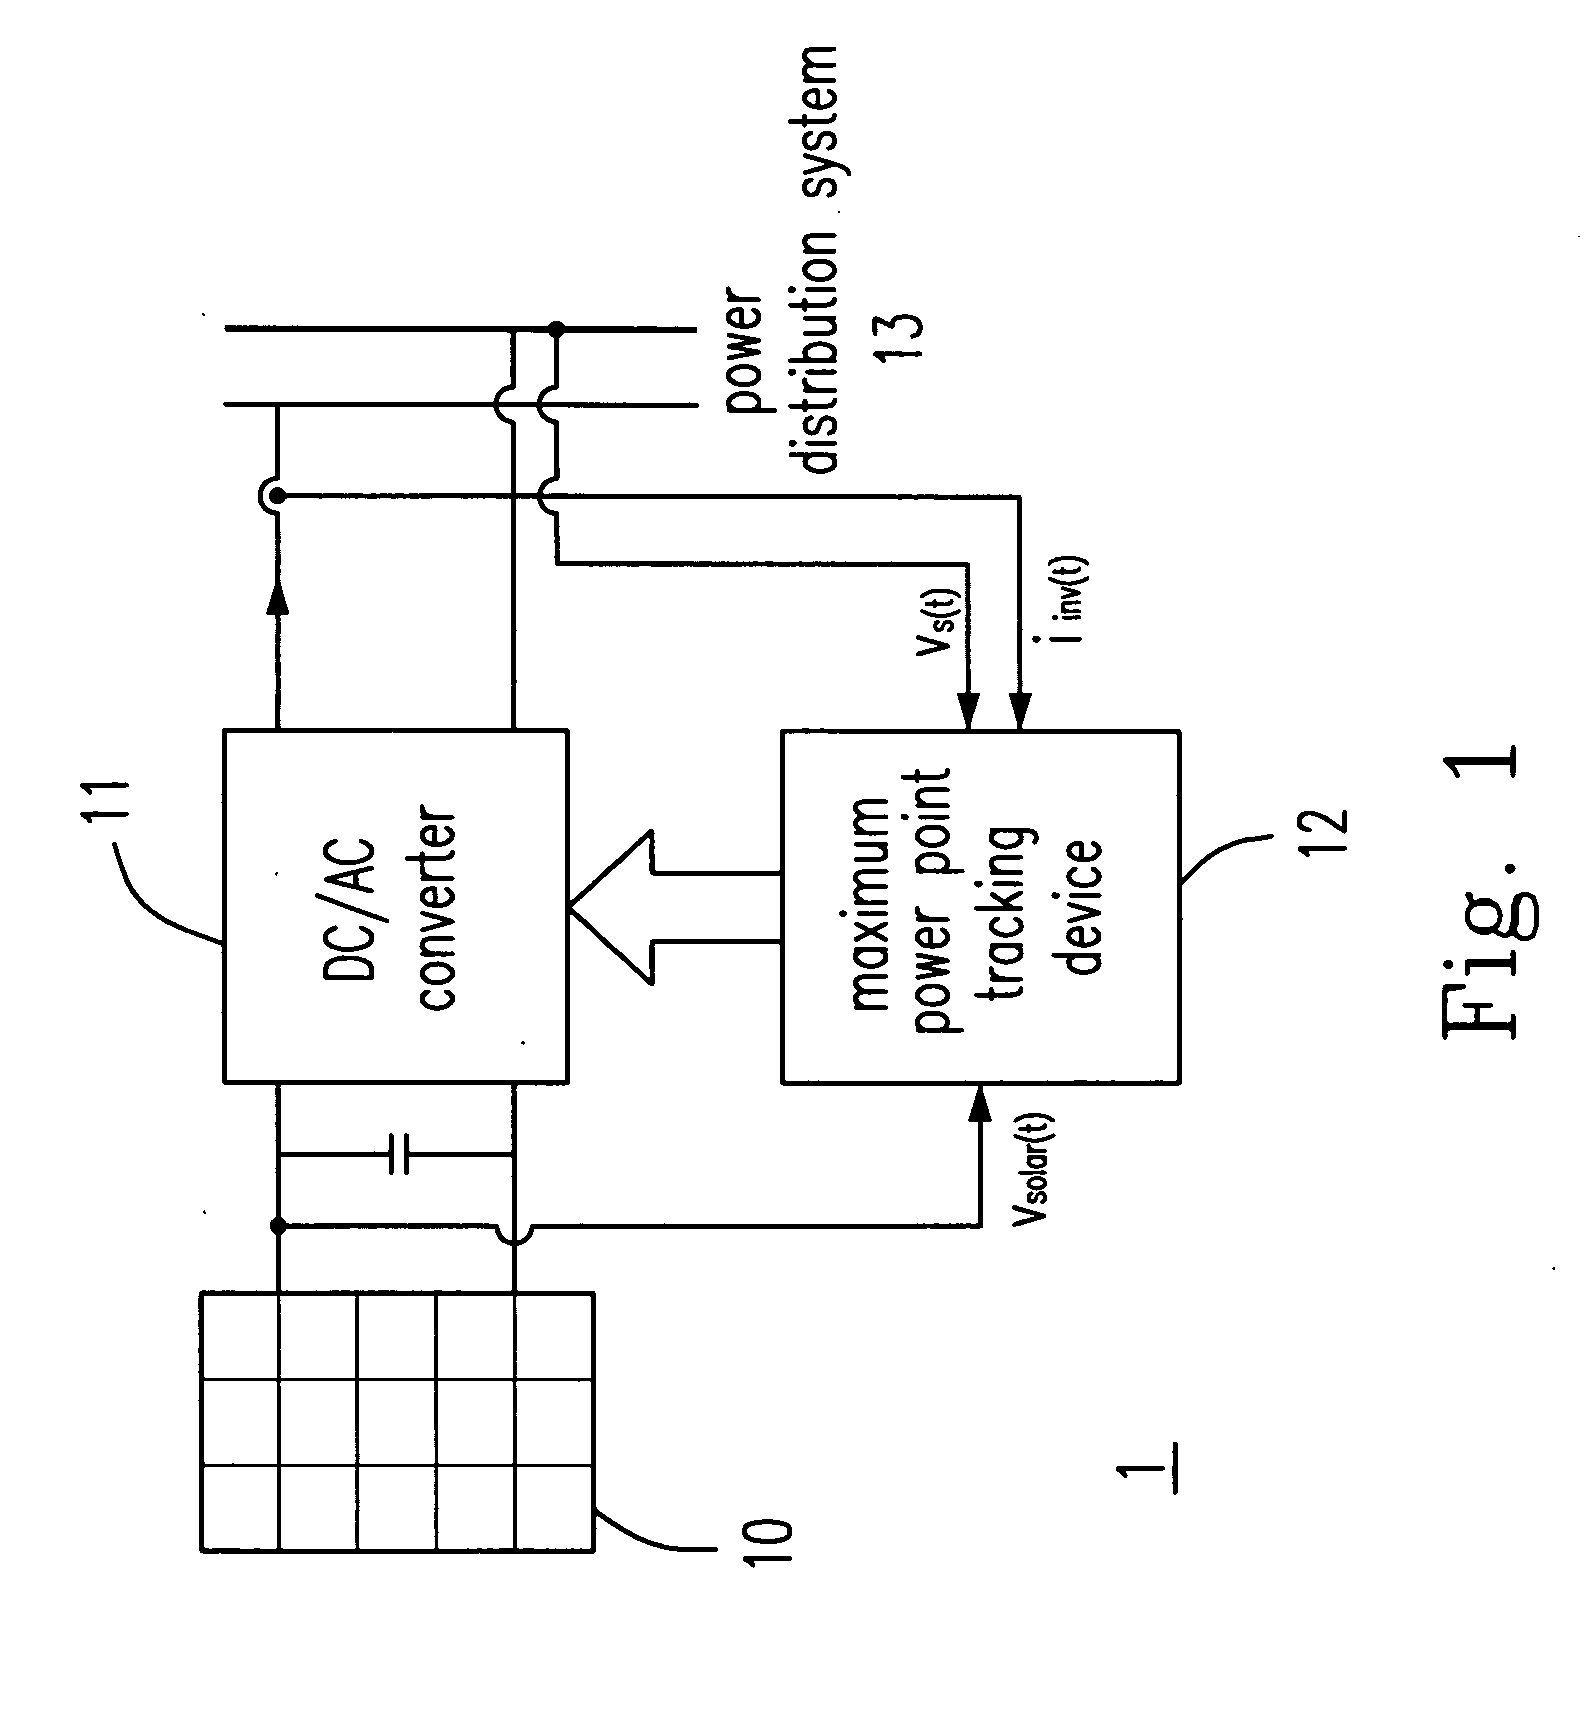 Methods and apparatuses for tracking maximum power point of solar electricity generating system